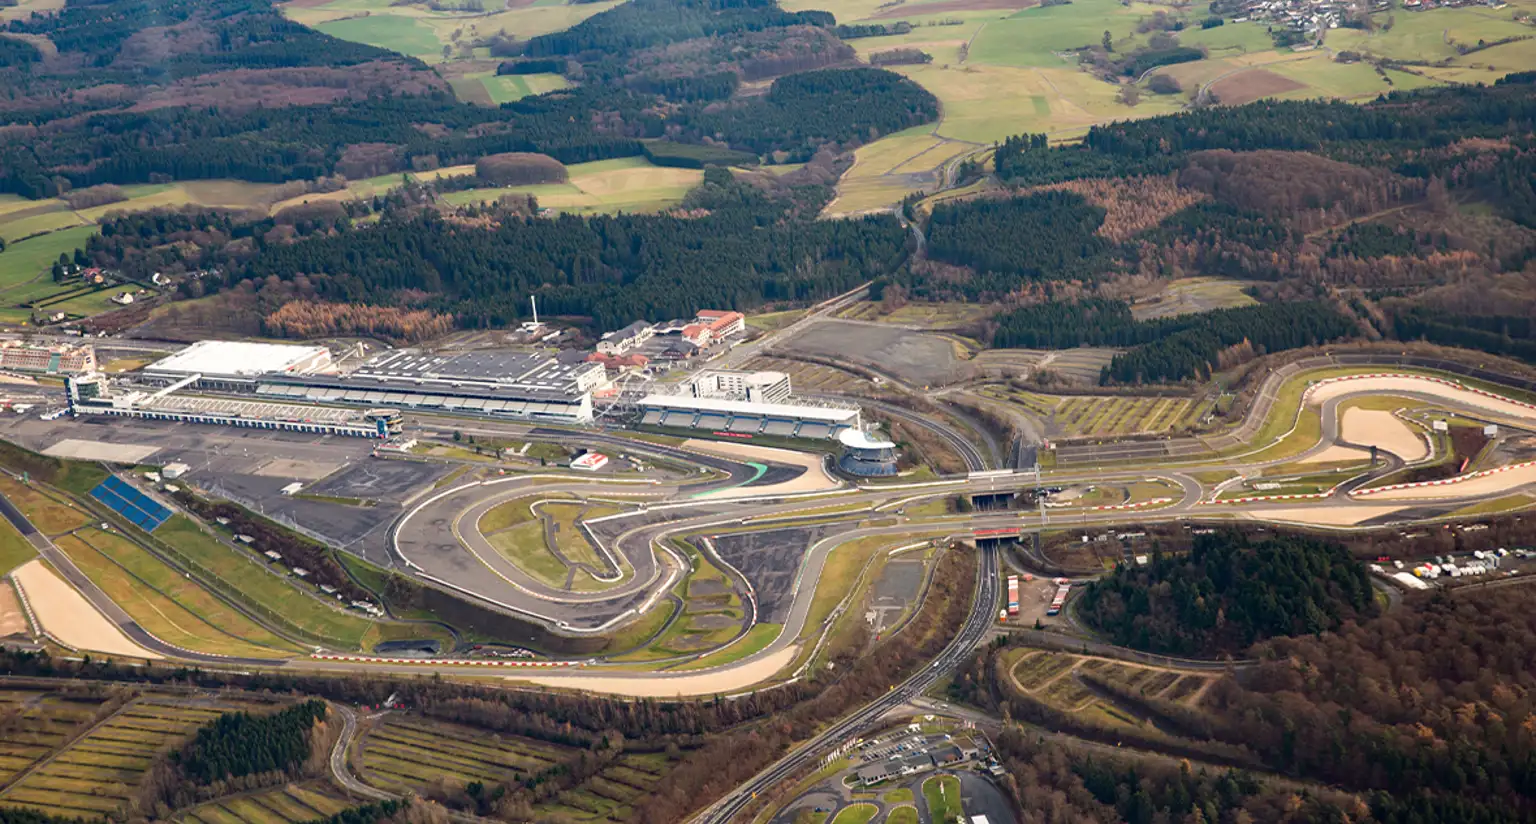 A guide to Nürburg and the Nürburgring